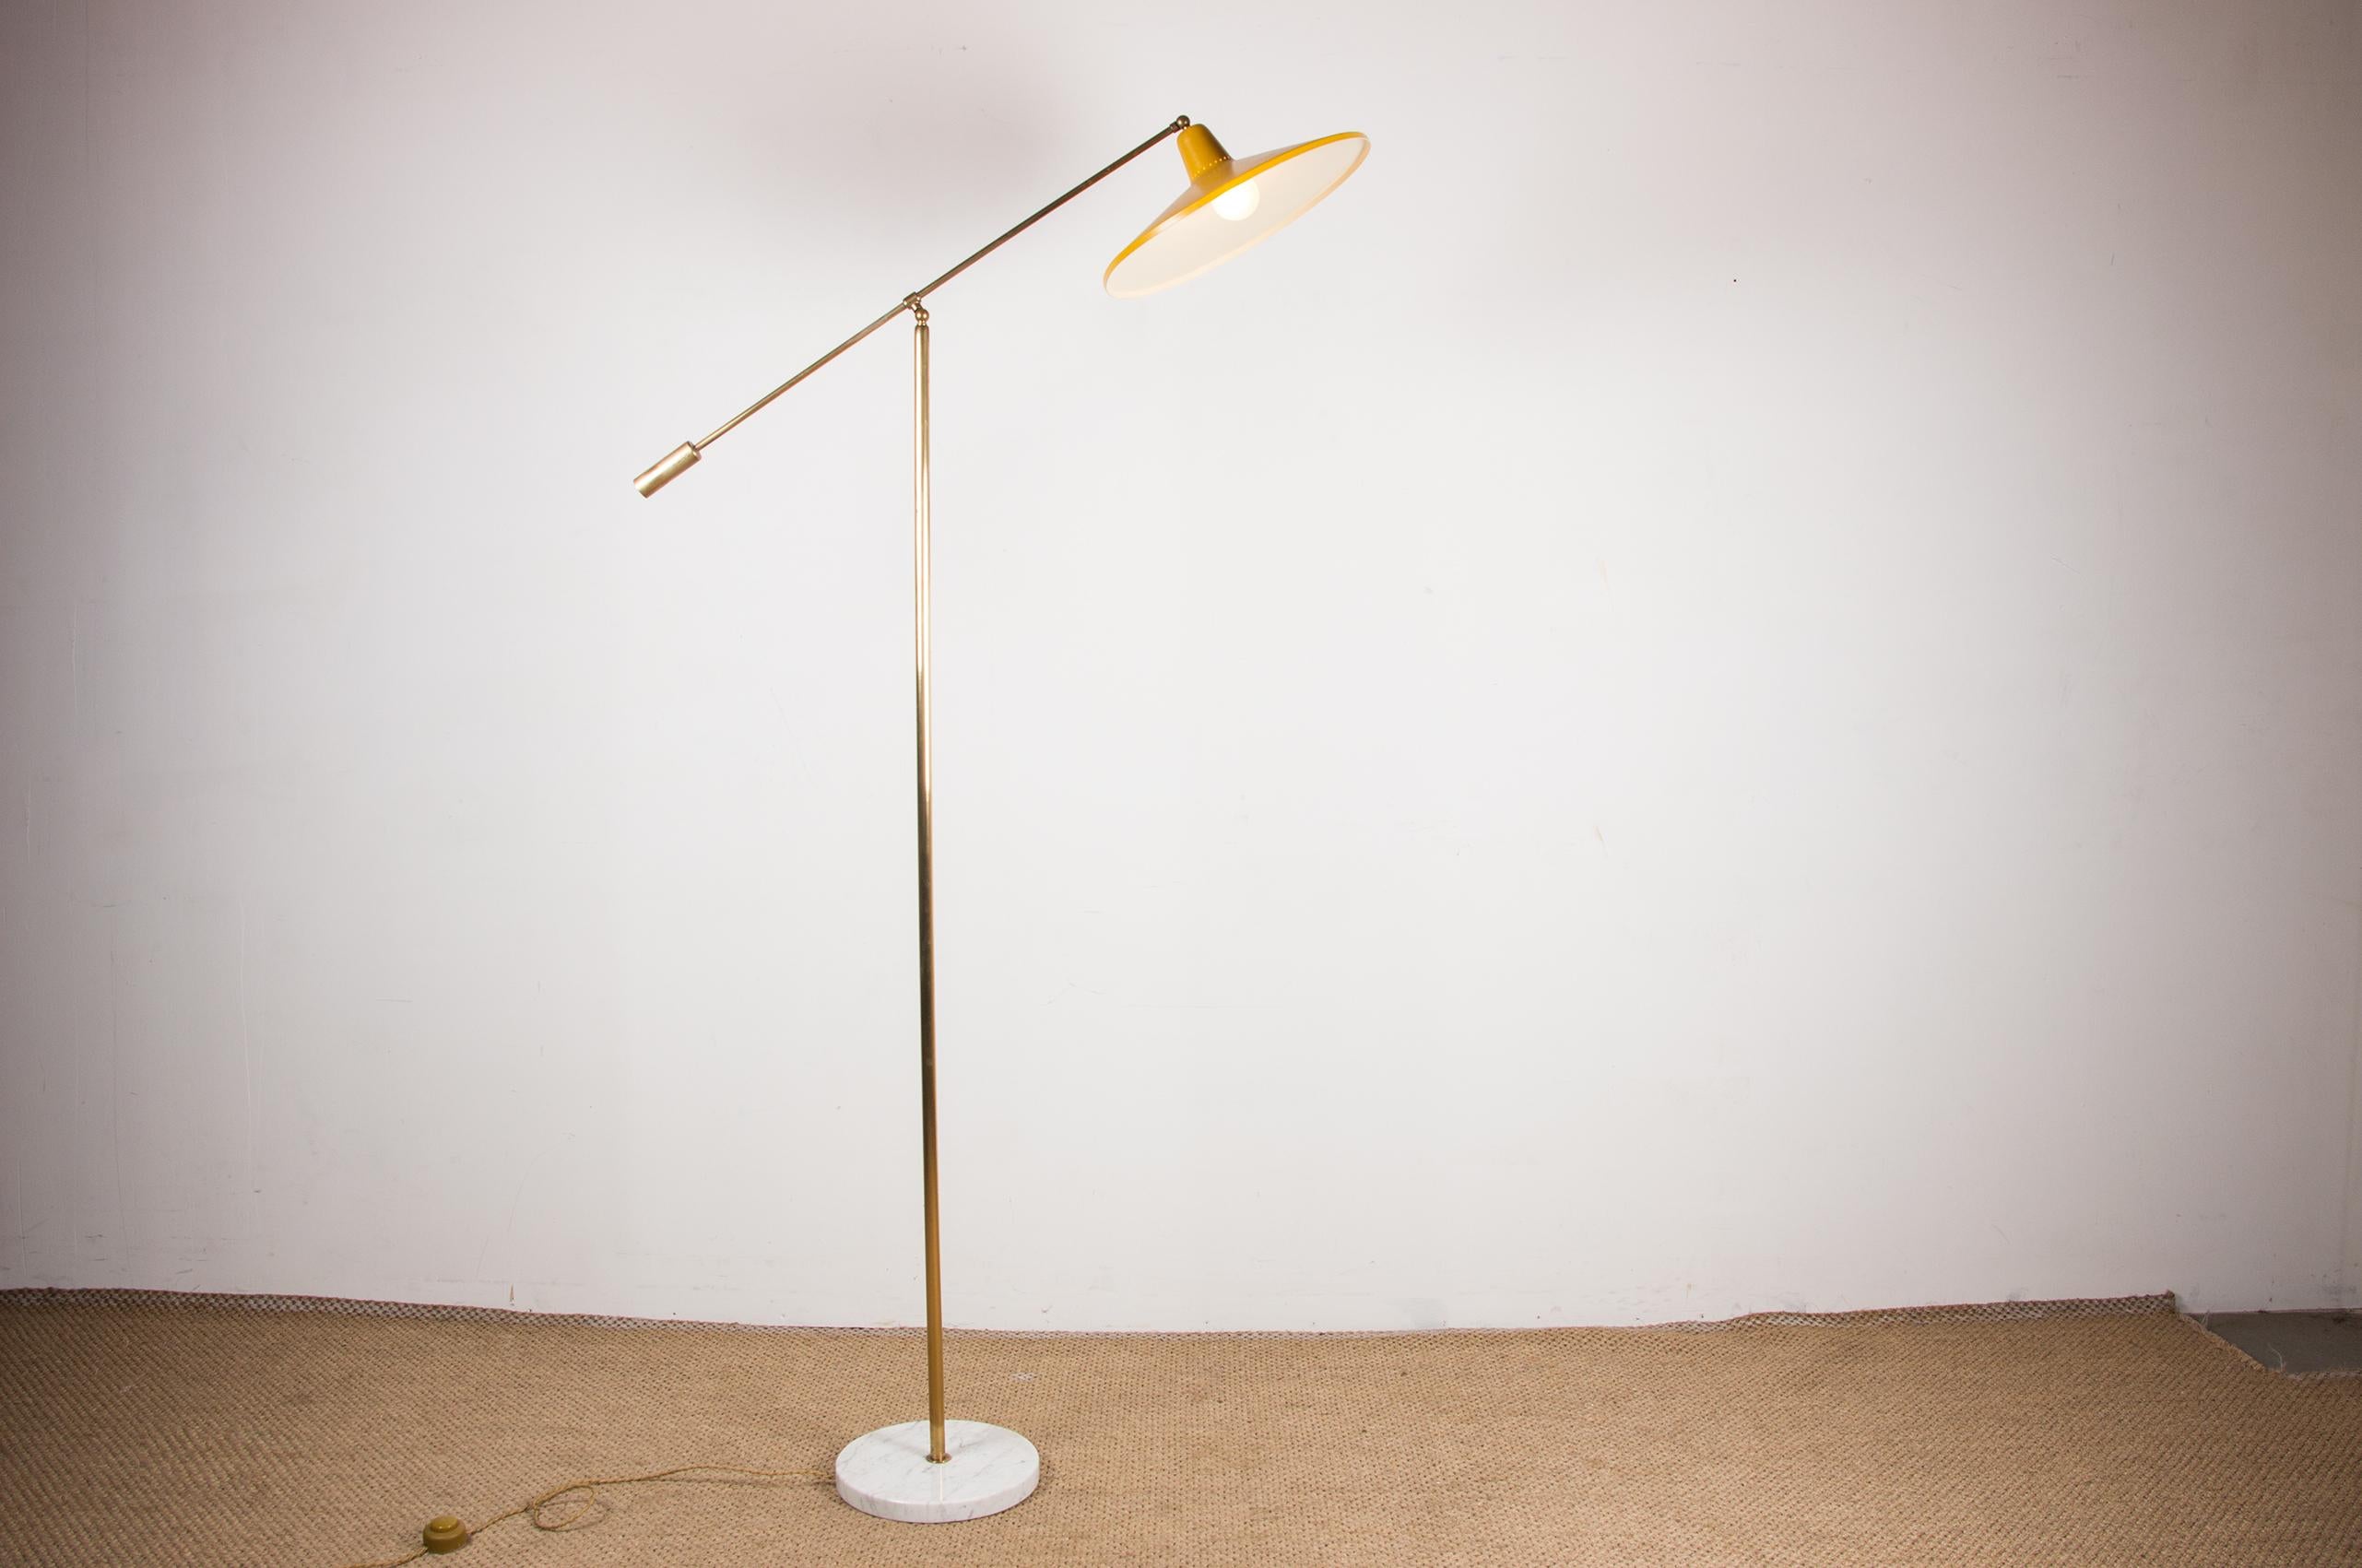 Superb floor lamp made of two intersecting brass arms. The upper arm is tiltable thanks to a clever counterweight. The yellow Metal pointed hat lampshade can be oriented as you wish. The base of the floor lamp is in Italian white marble. Very good